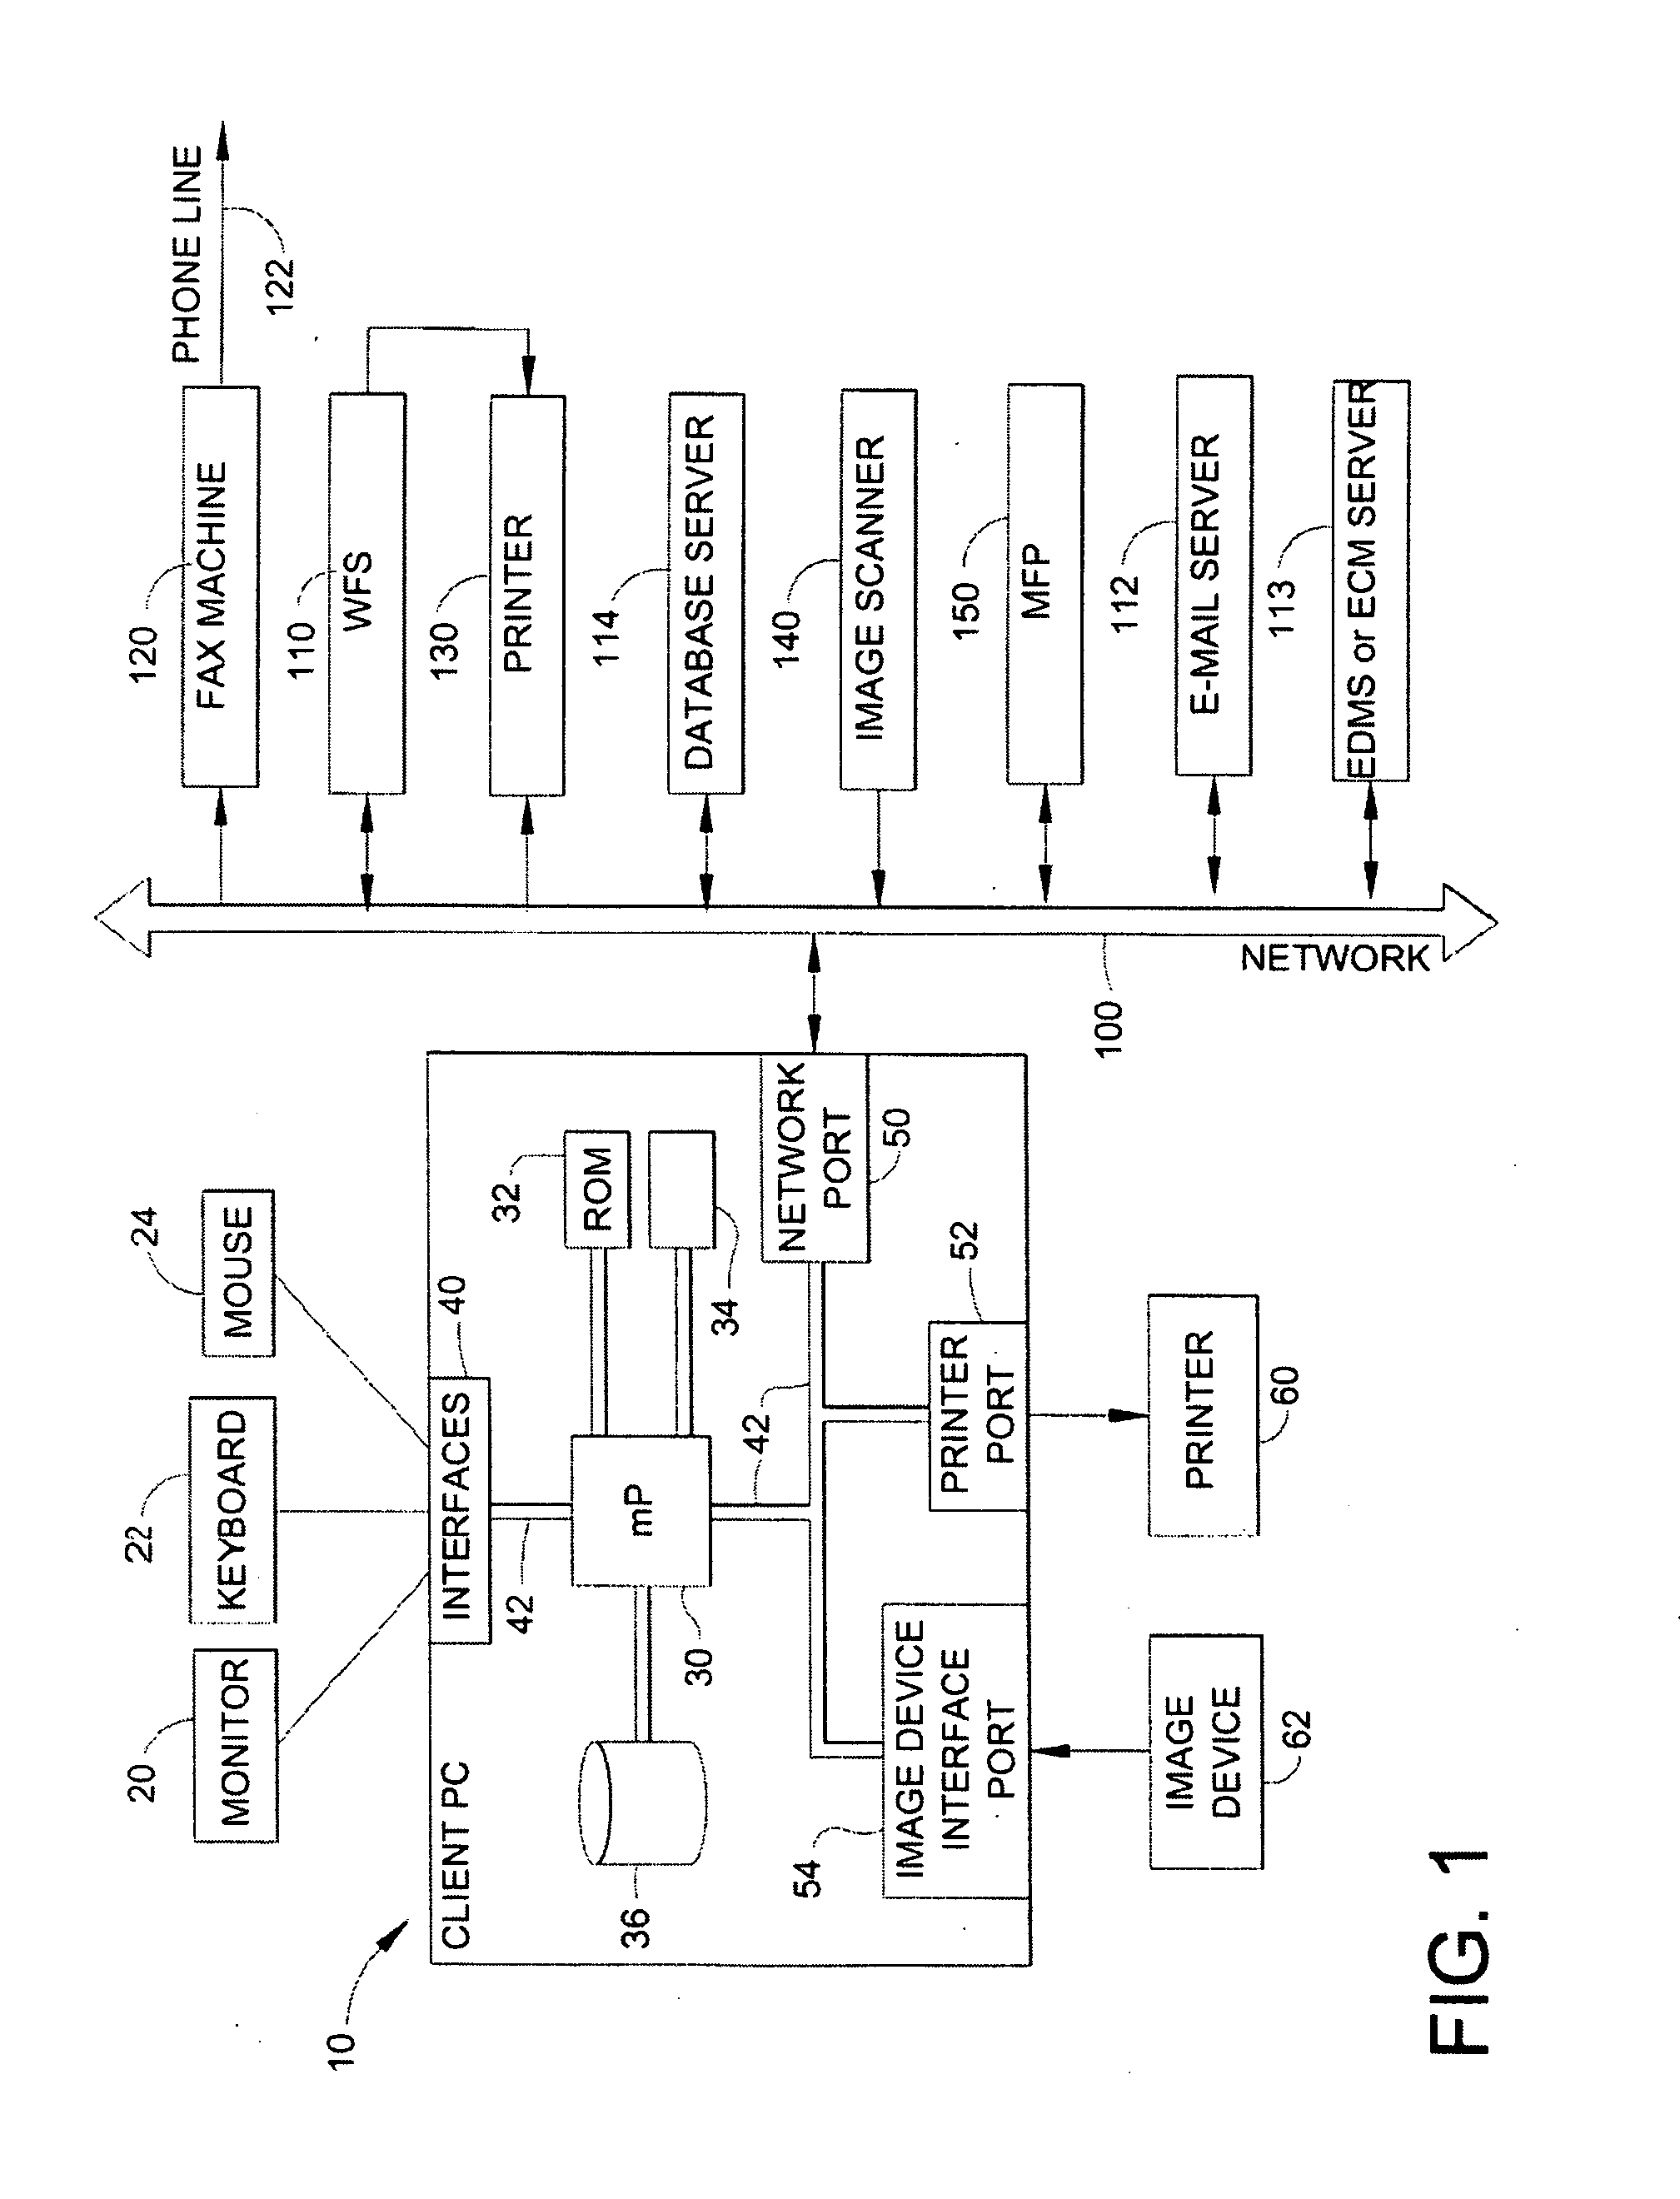 Method and apparatus for providing a work flow web application that receives image data via a web browser and exports the image data to a document processing server